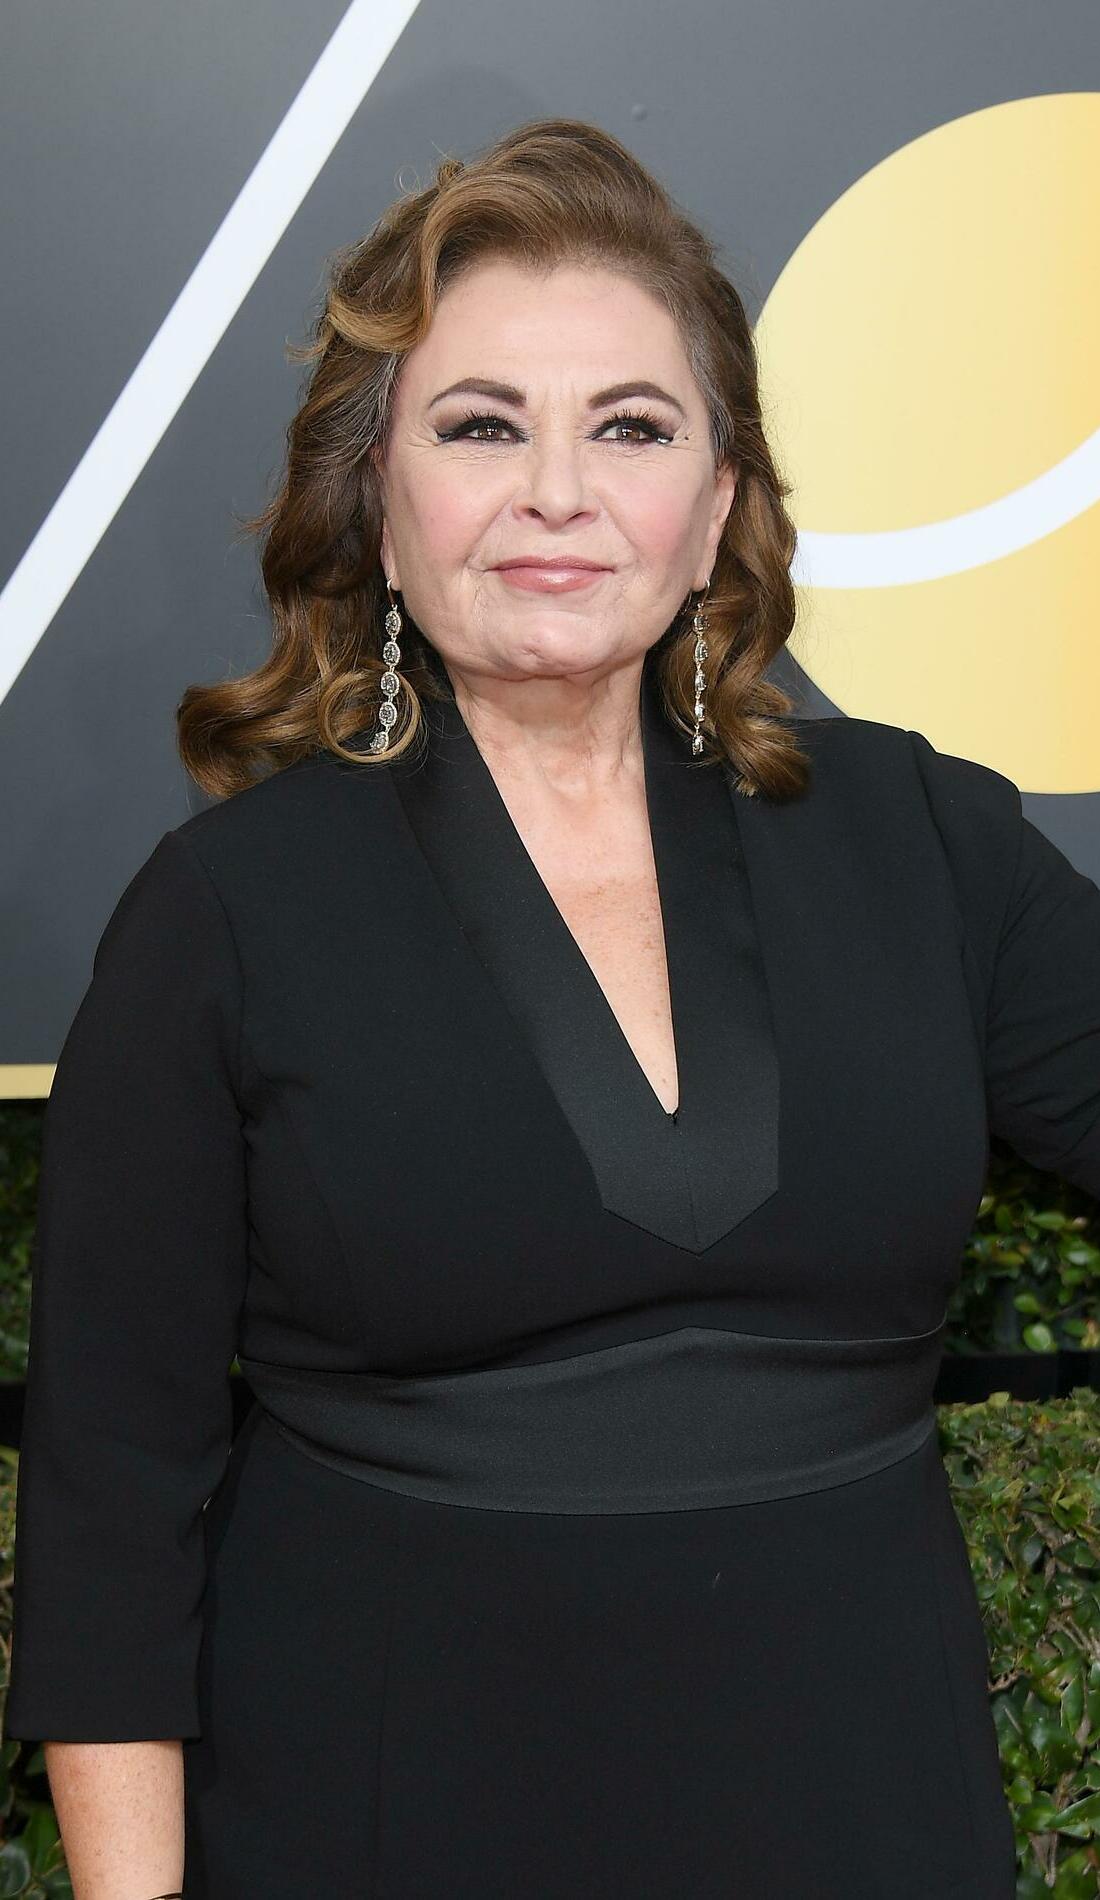 A Roseanne Barr live event